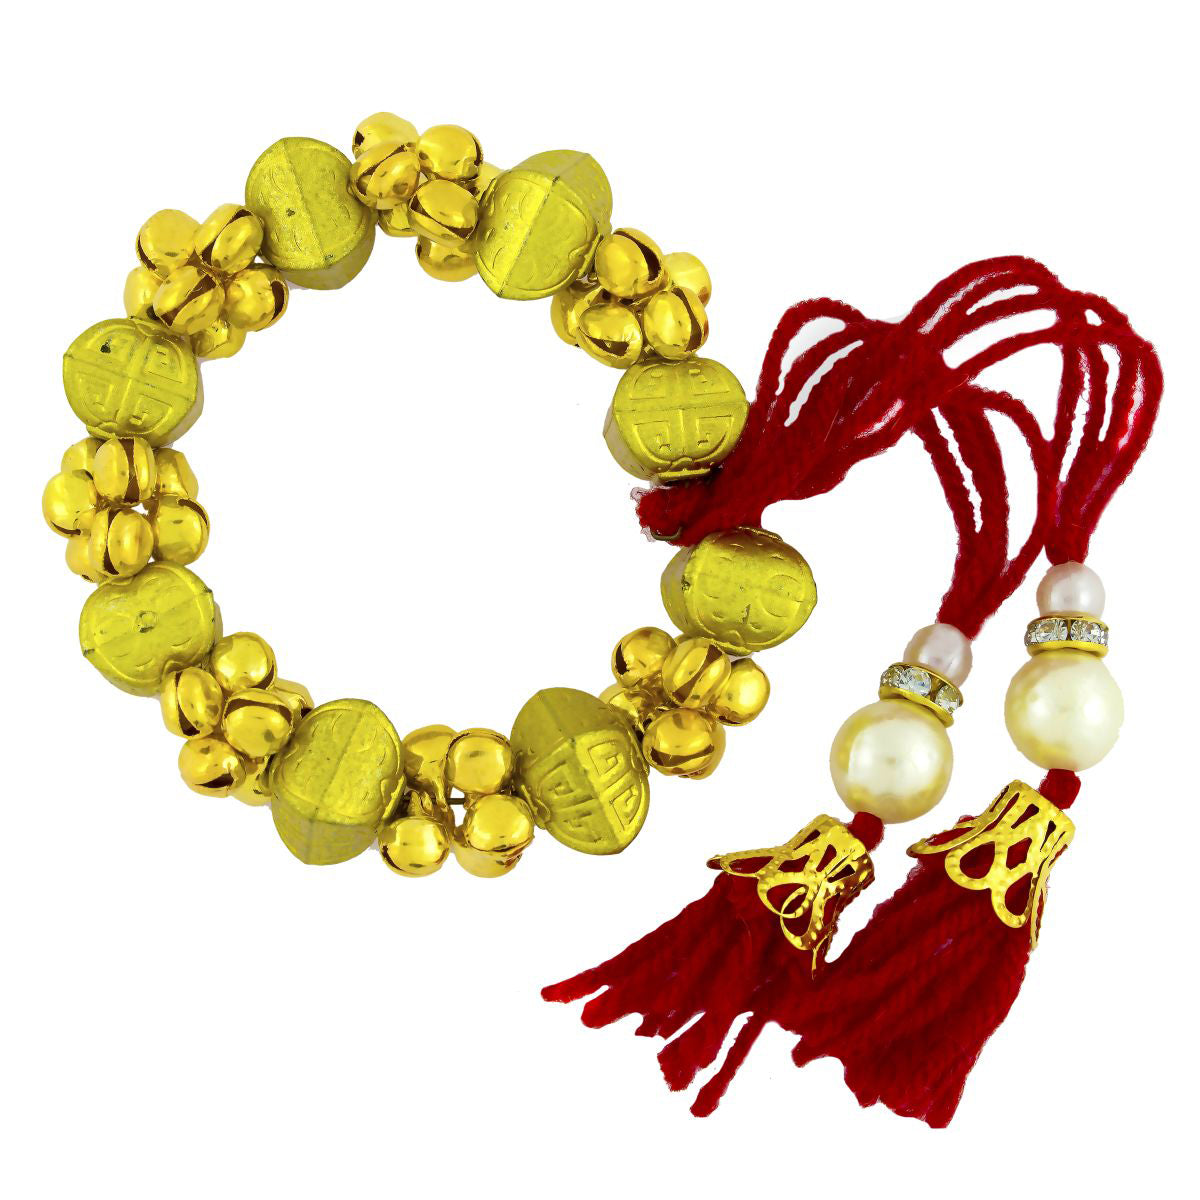 Handcrafted Red Thread Gold Beads Pearl Cz Free Size Stretch Bracelet